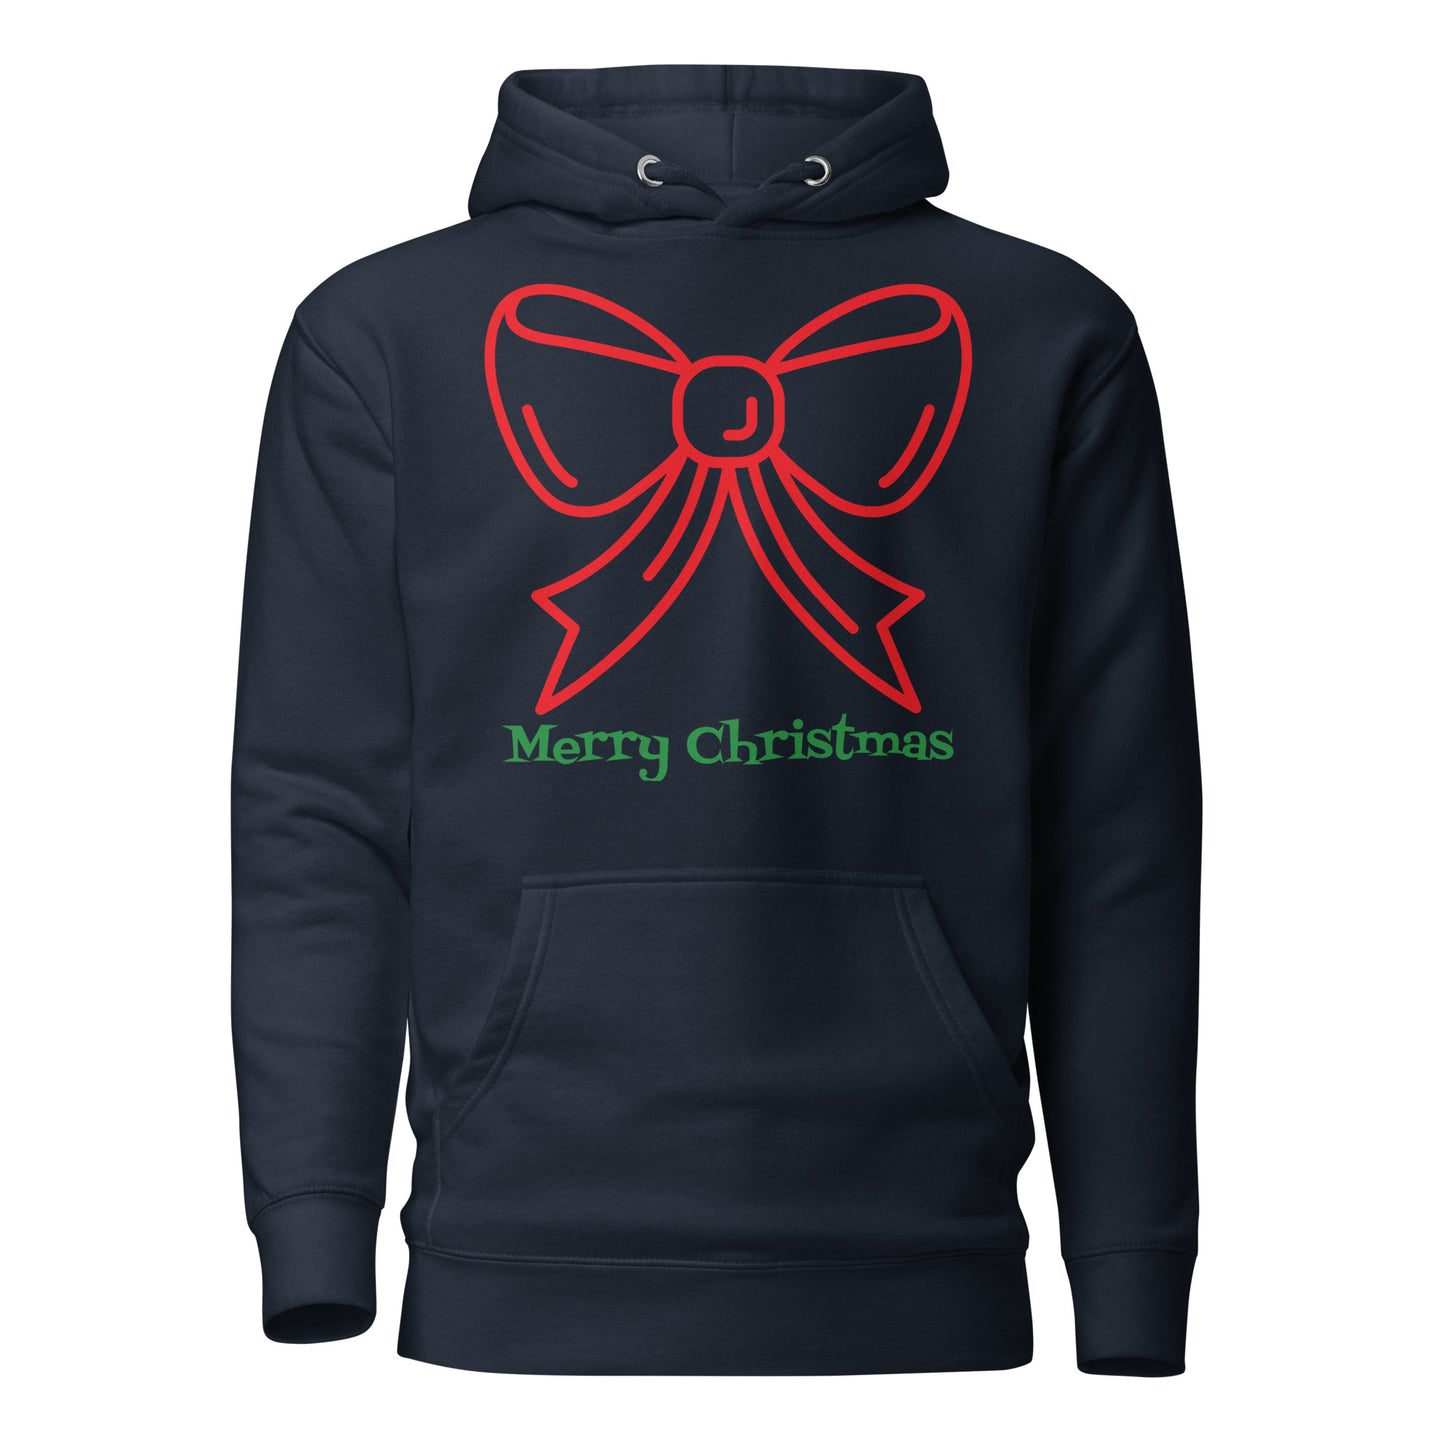 Merry Christmas Red Bow Unisex Hoodie, Christmas Gifts, Christmas Sweater, Christmas Hoodie, Christmas clothes